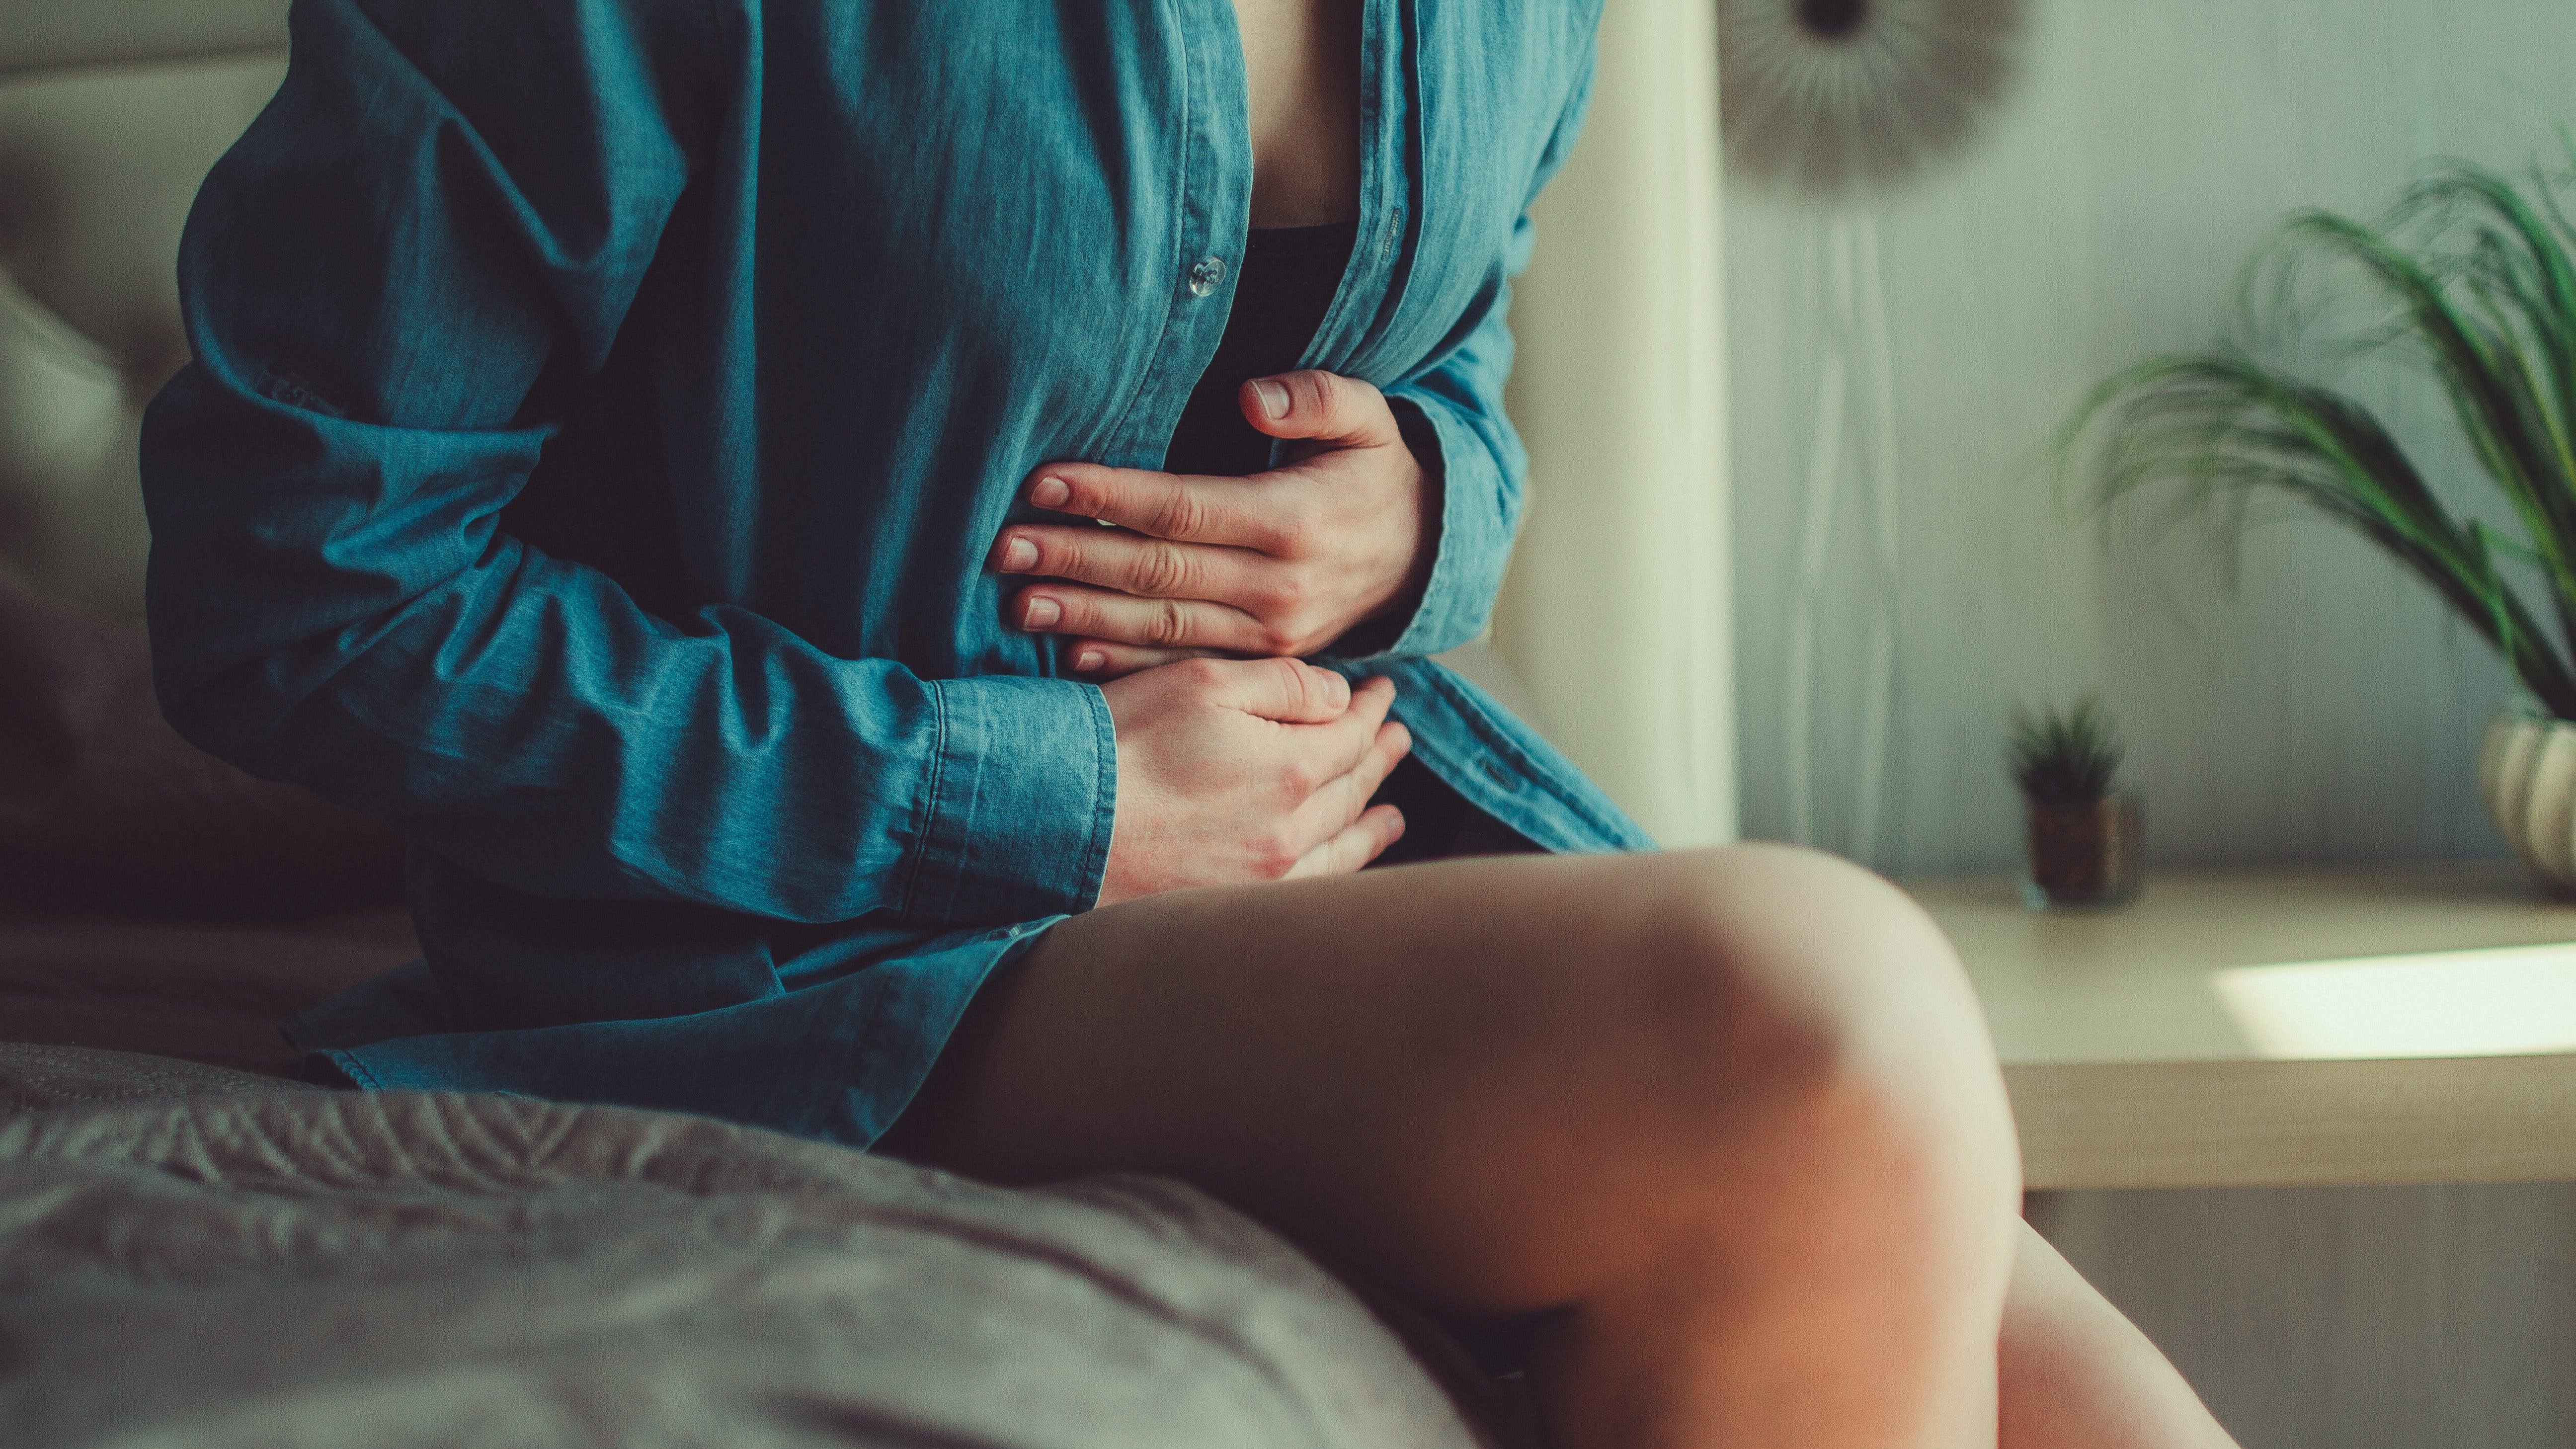 What Is ‘Period Flu’ and How Can You Deal With It?